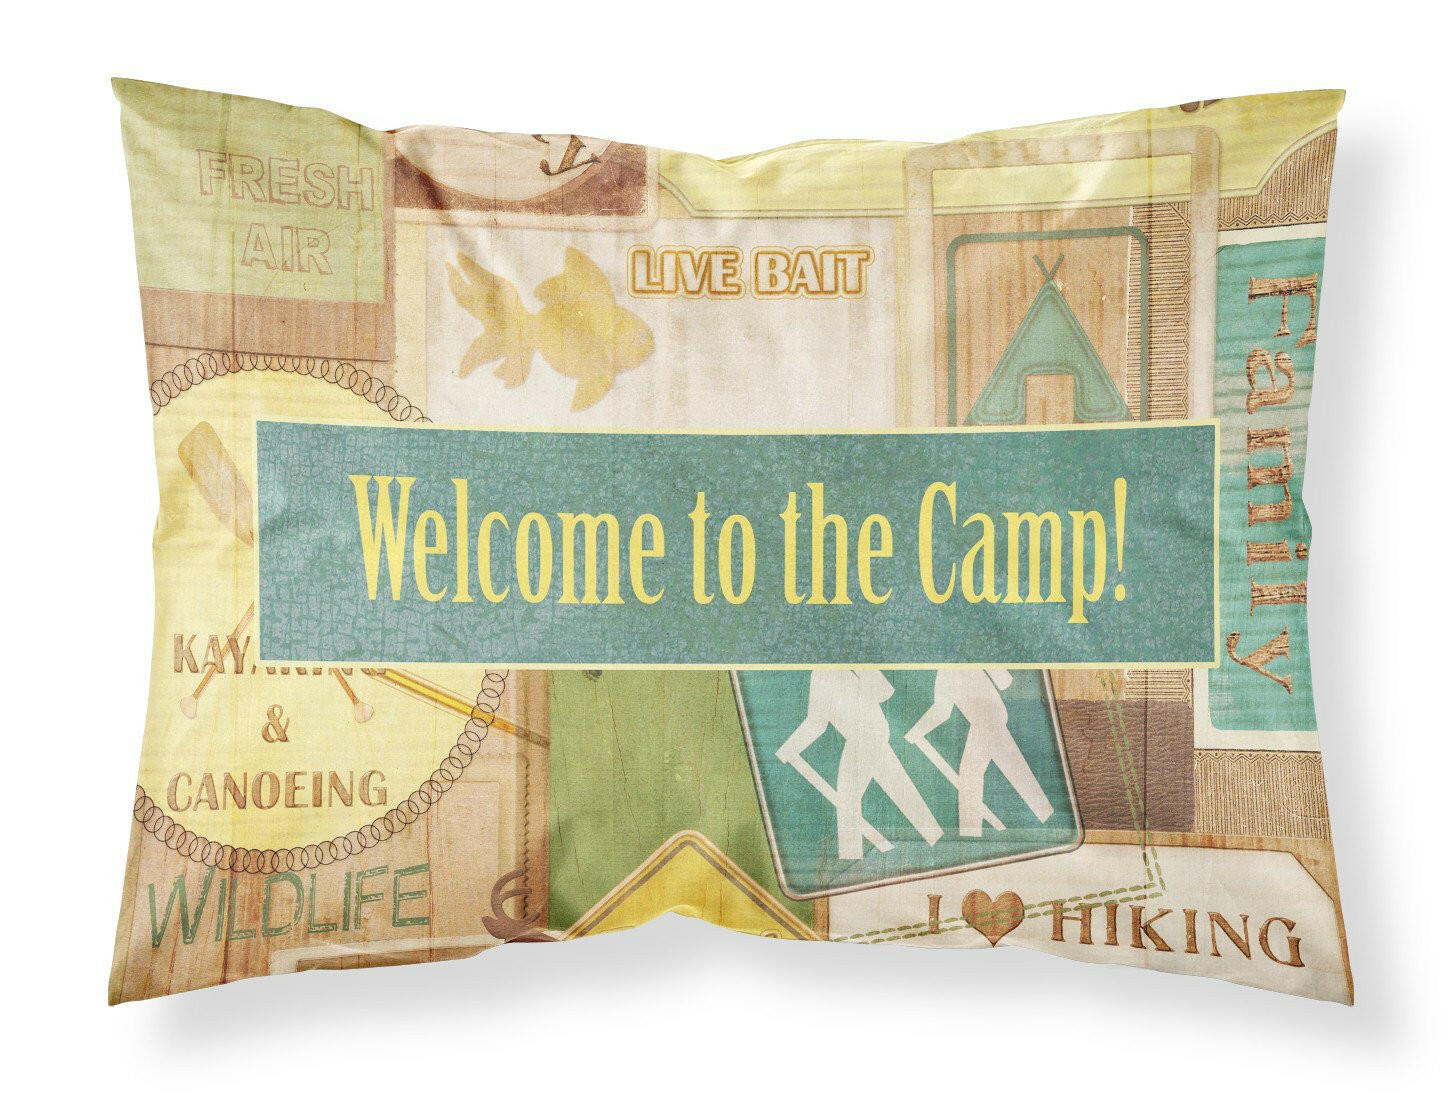 Welcome to the Camp Moisture wicking Fabric standard pillowcase SB3080PILLOWCASE by Caroline's Treasures